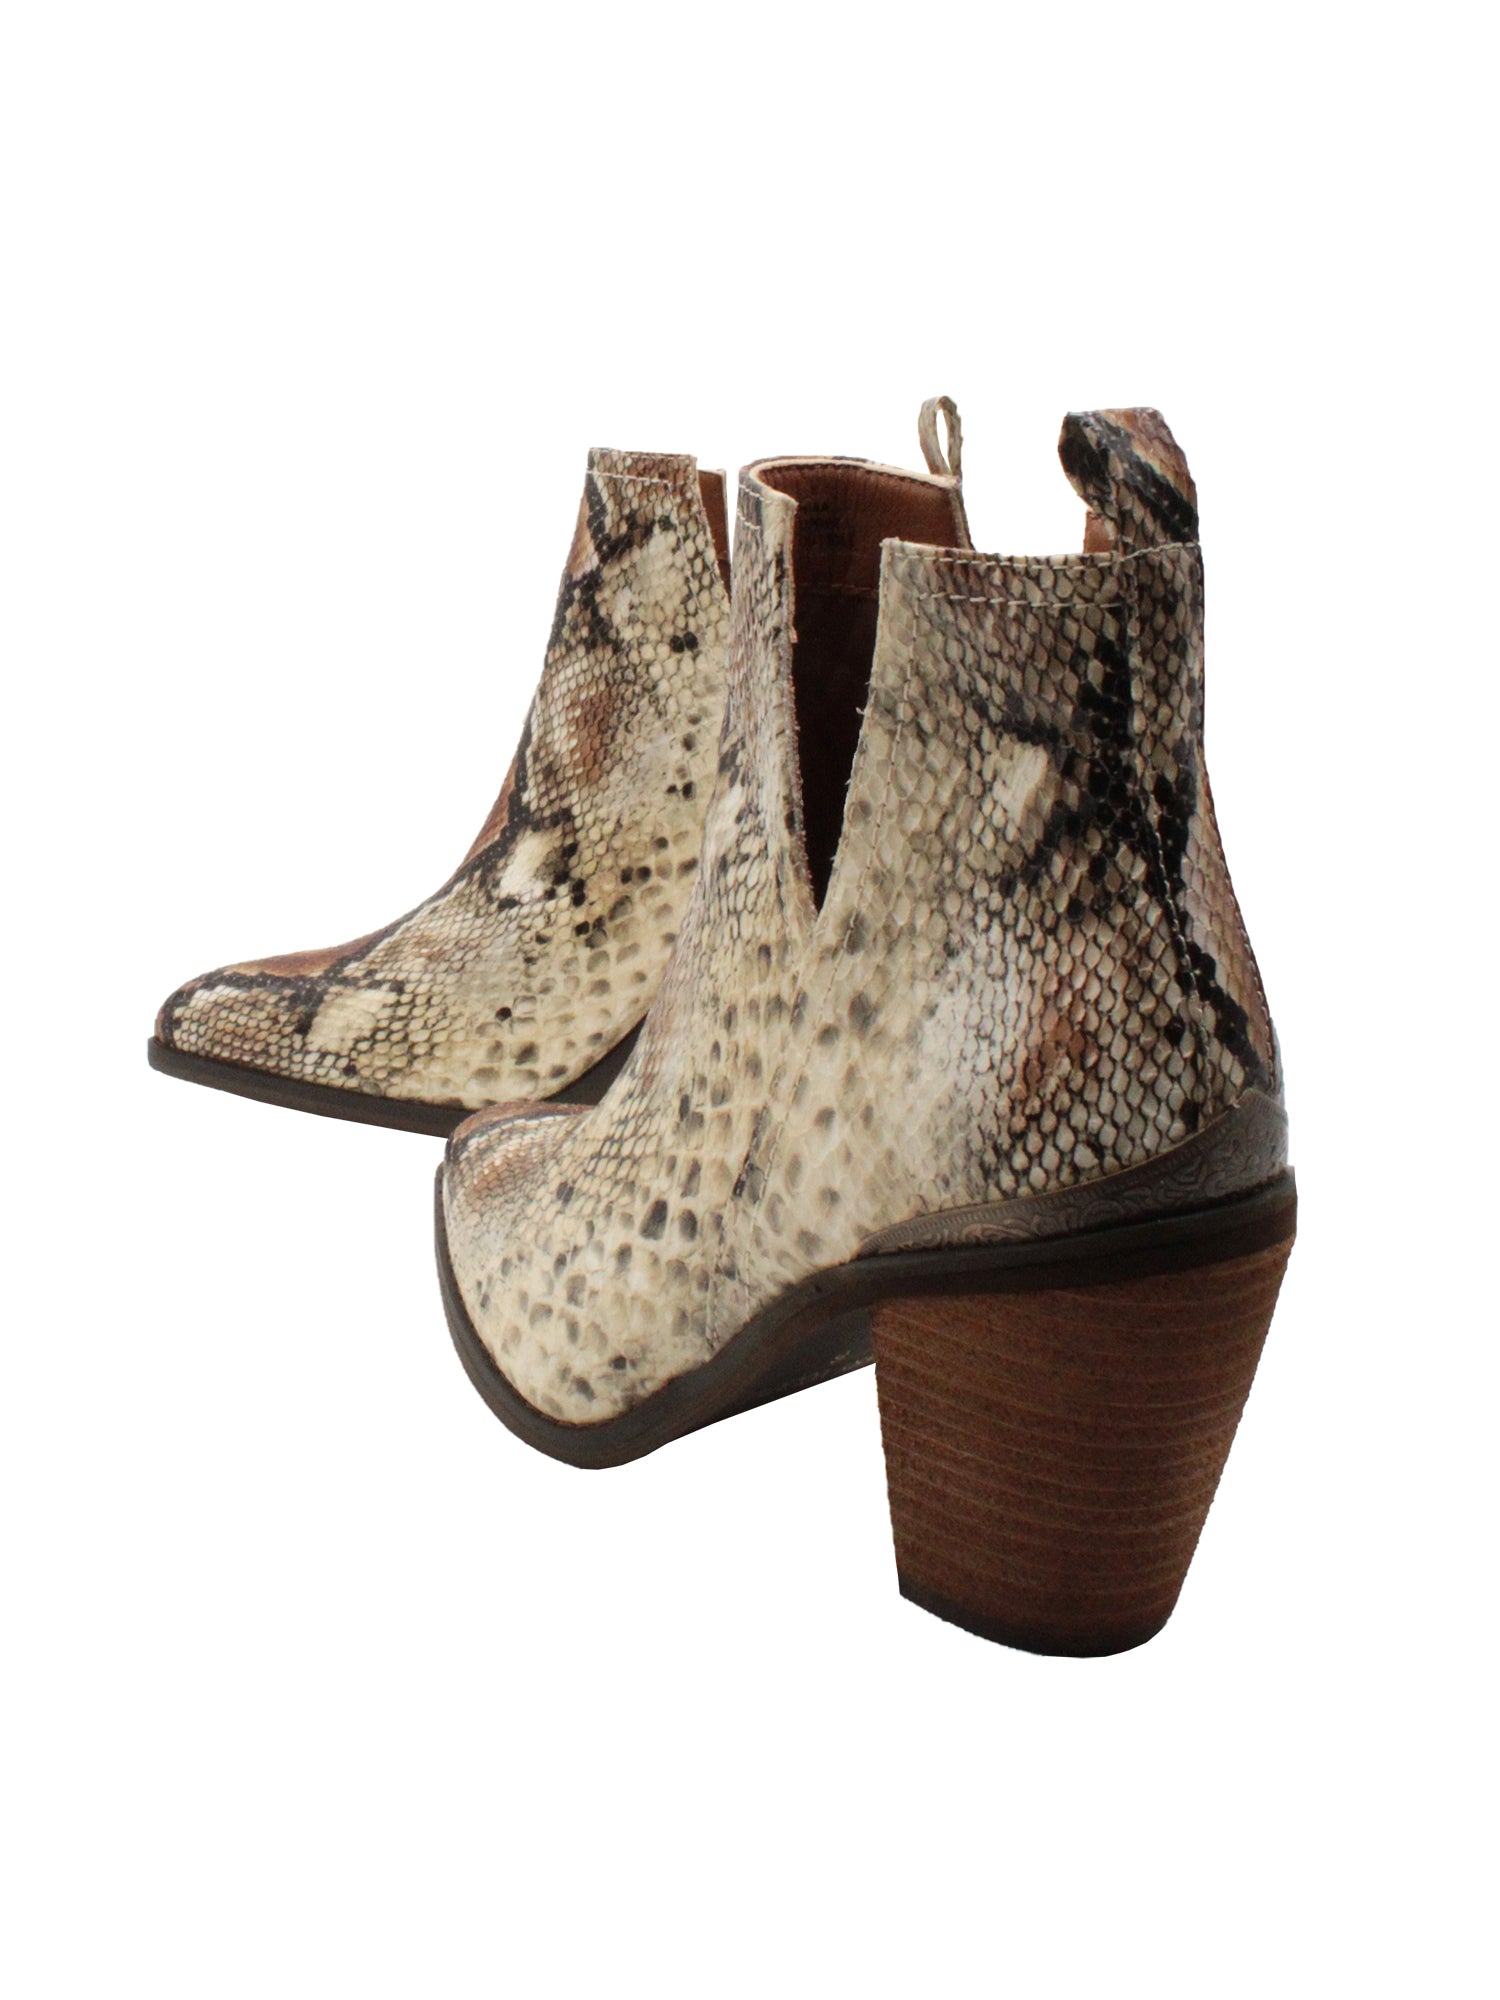 Very Volatile’s ‘Mumba’ open shank, pull-on bootie can complete any look in your fall wardrobe with its genuine hair calf or faux exotic upper. Set on a stacked leather heel, this pair nods to the Western trend with a burnished metal heel rand and tapered toe shape. Wear them with everything from skinny jeans to feminine dresses.